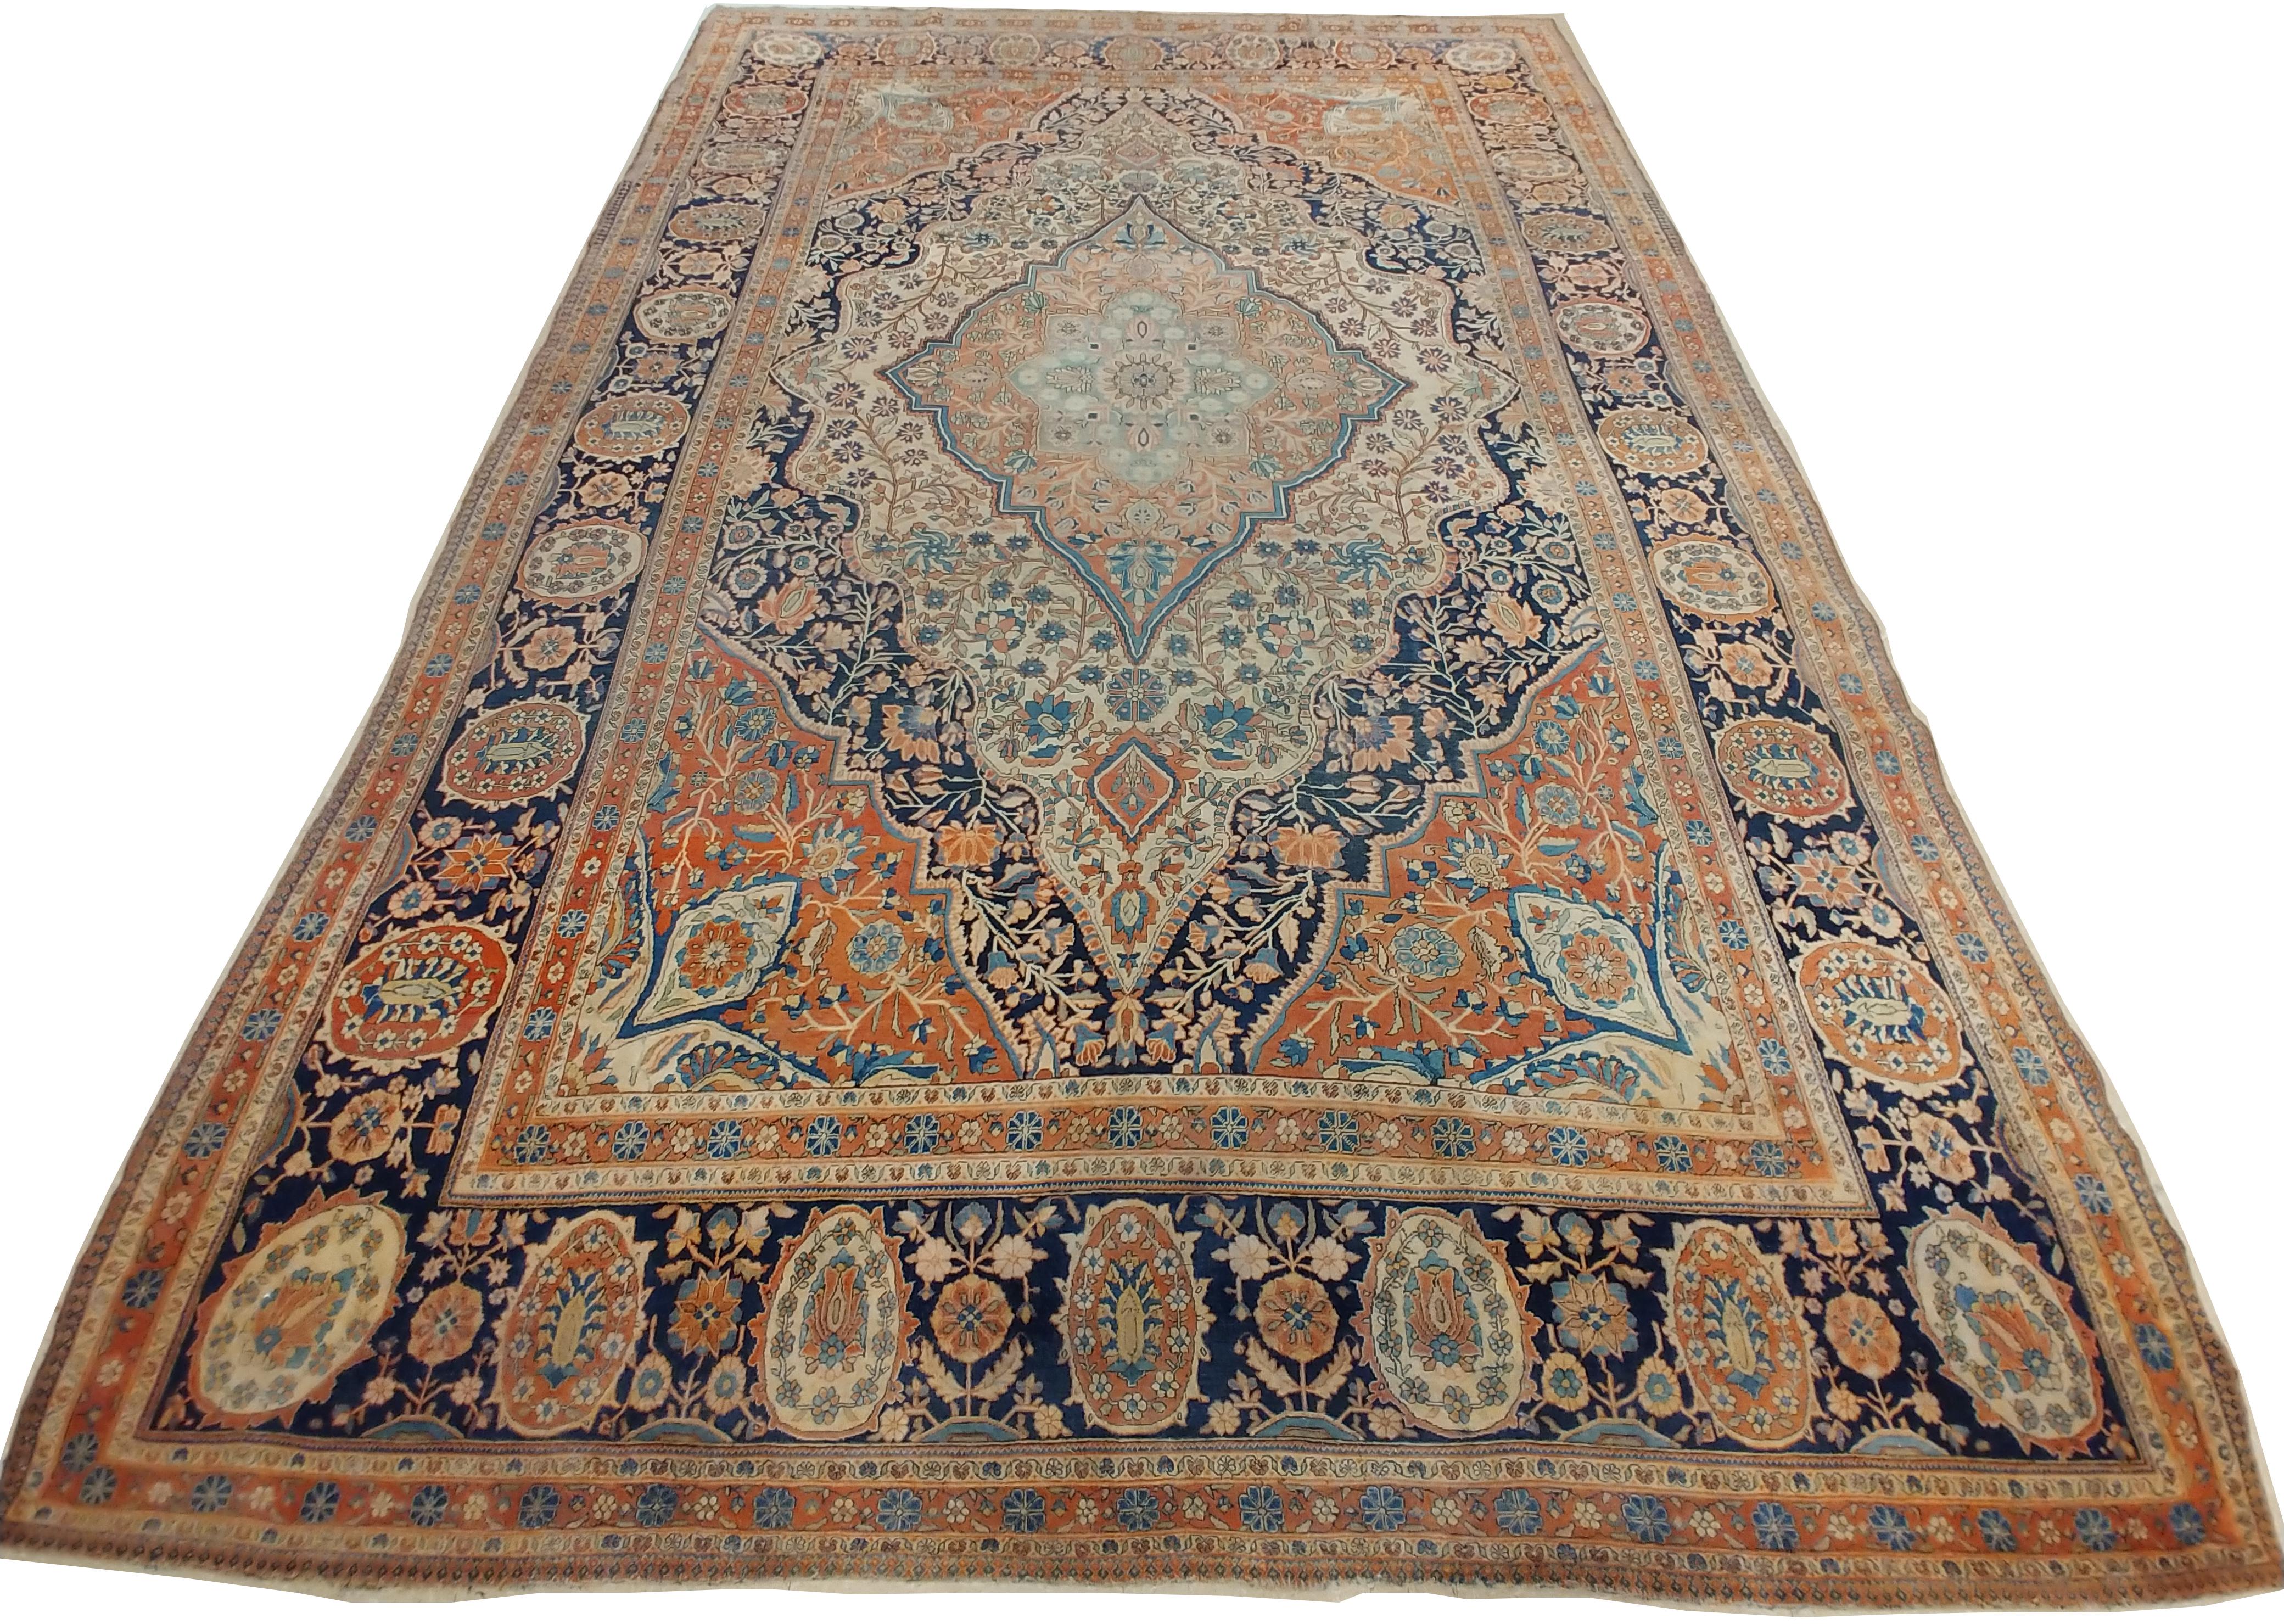 Hand-Knotted Antique Persian Mohtasham Kashan Carpet, Traditional, Ivory, Blue, Green, Reds For Sale